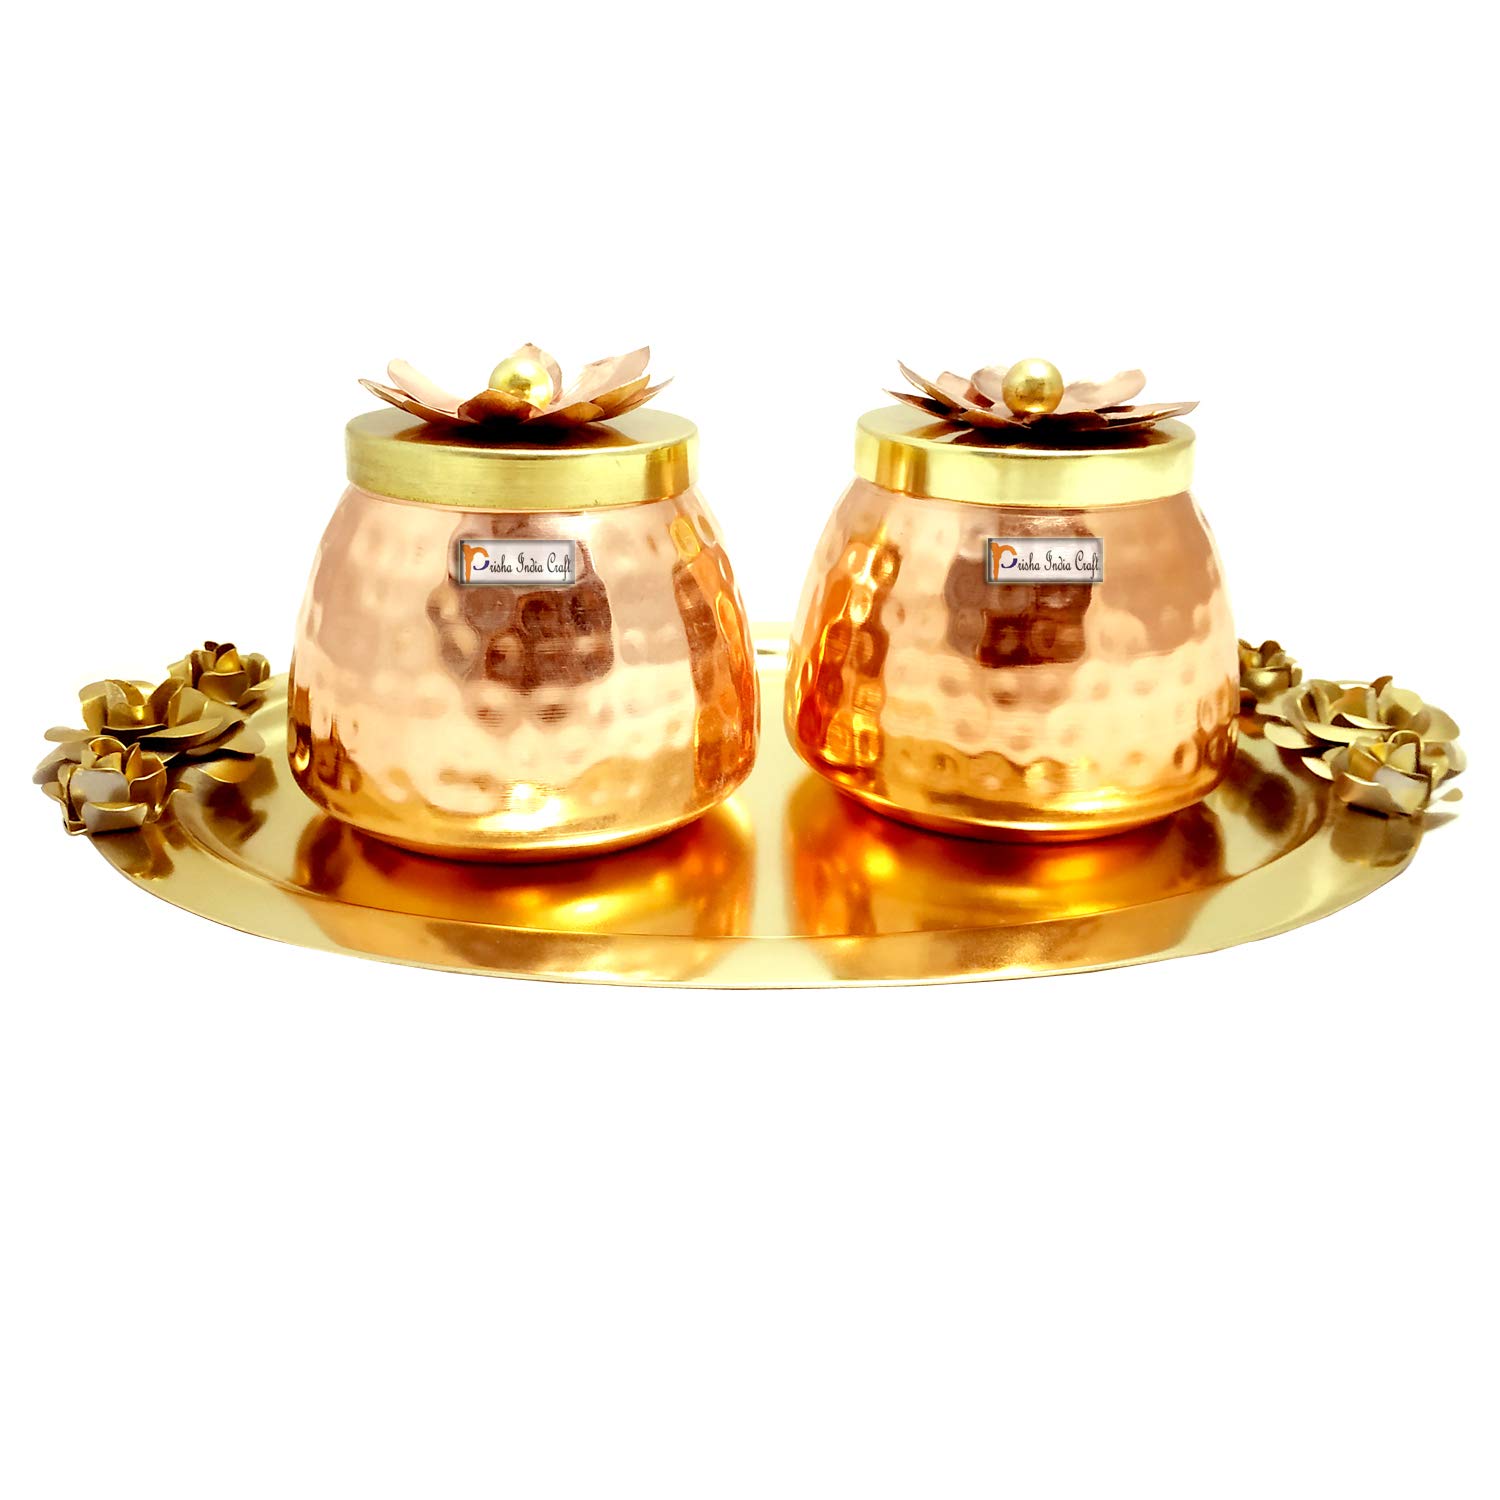 Prisha India Craft Copper Plating Dry Fruit Container Decorative Serving Bowls set with Plate Gold